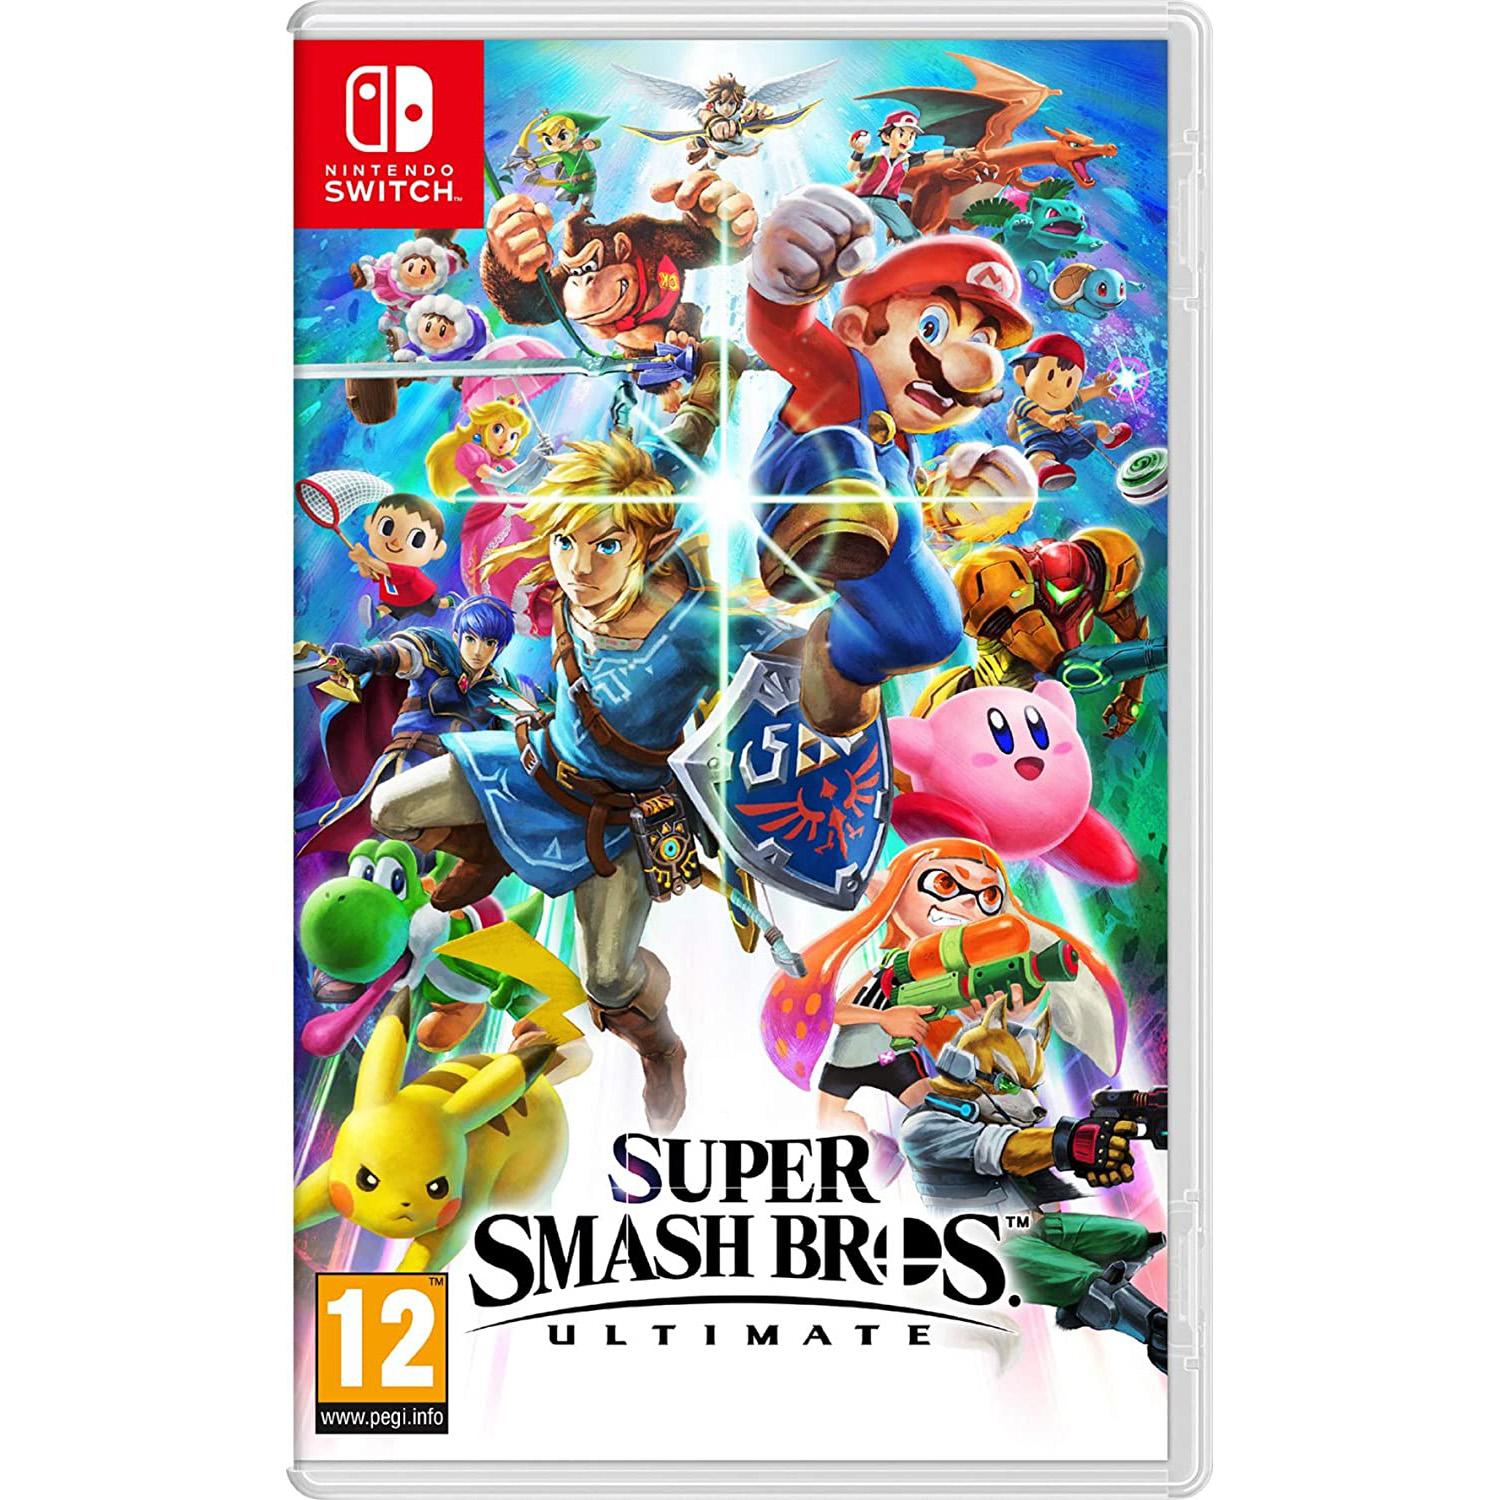 Super Smash Bros Ultimate Nintendo Switch for $32.75 Shipped